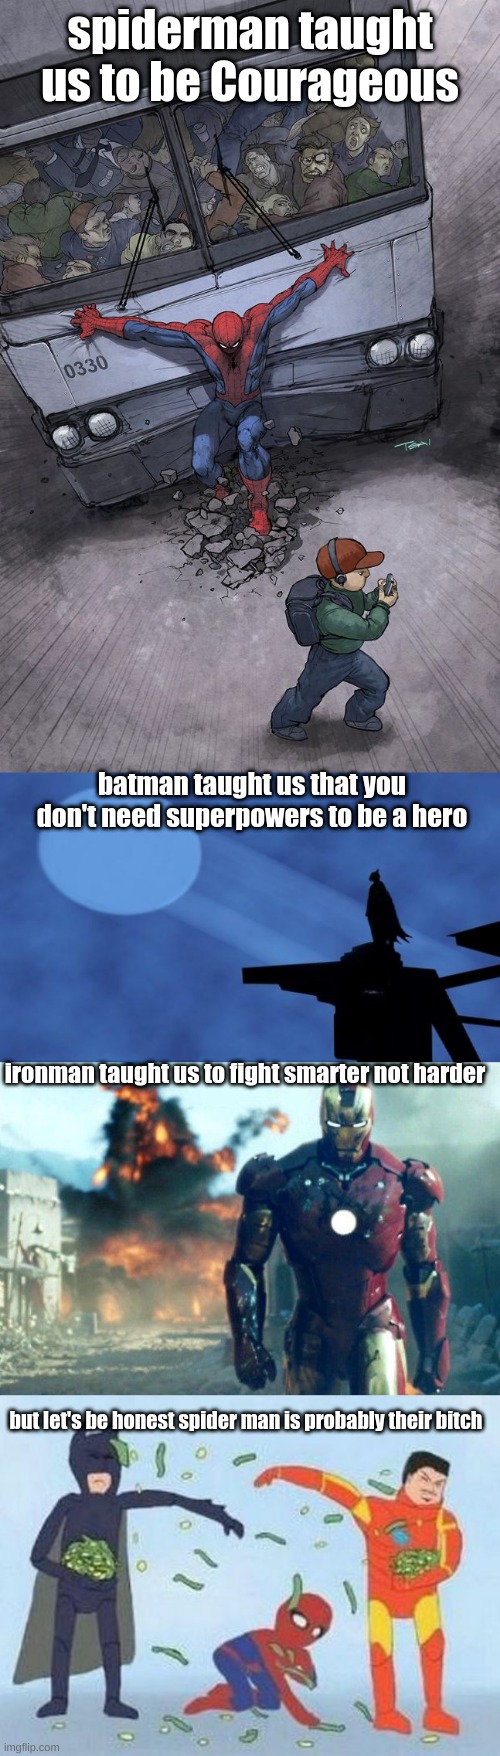 spiderman taught us to be Courageous; batman taught us that you don't need superpowers to be a hero; ironman taught us to fight smarter not harder; but let's be honest spider man is probably their bitch | image tagged in spider-man bus,batman signal,ironman,memes,pathetic spidey | made w/ Imgflip meme maker